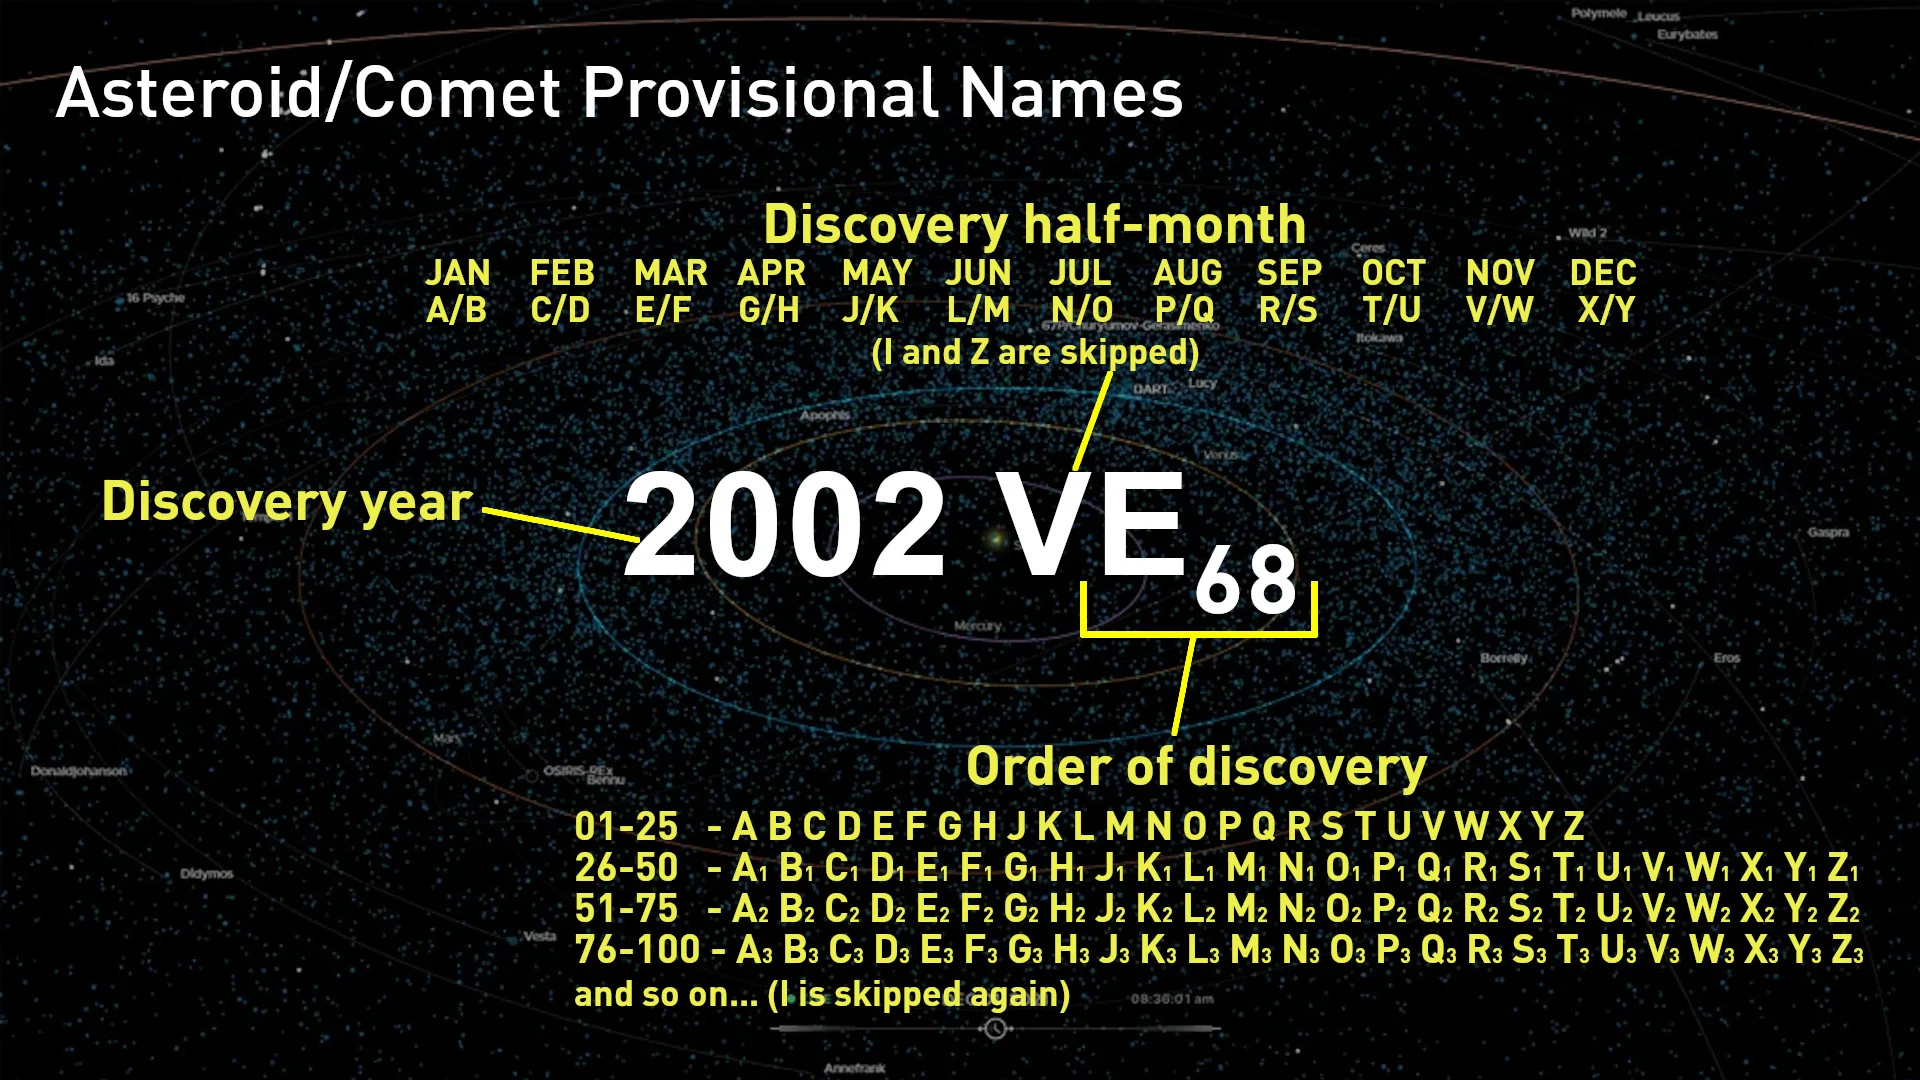 Asteroid Comet Provisional Names